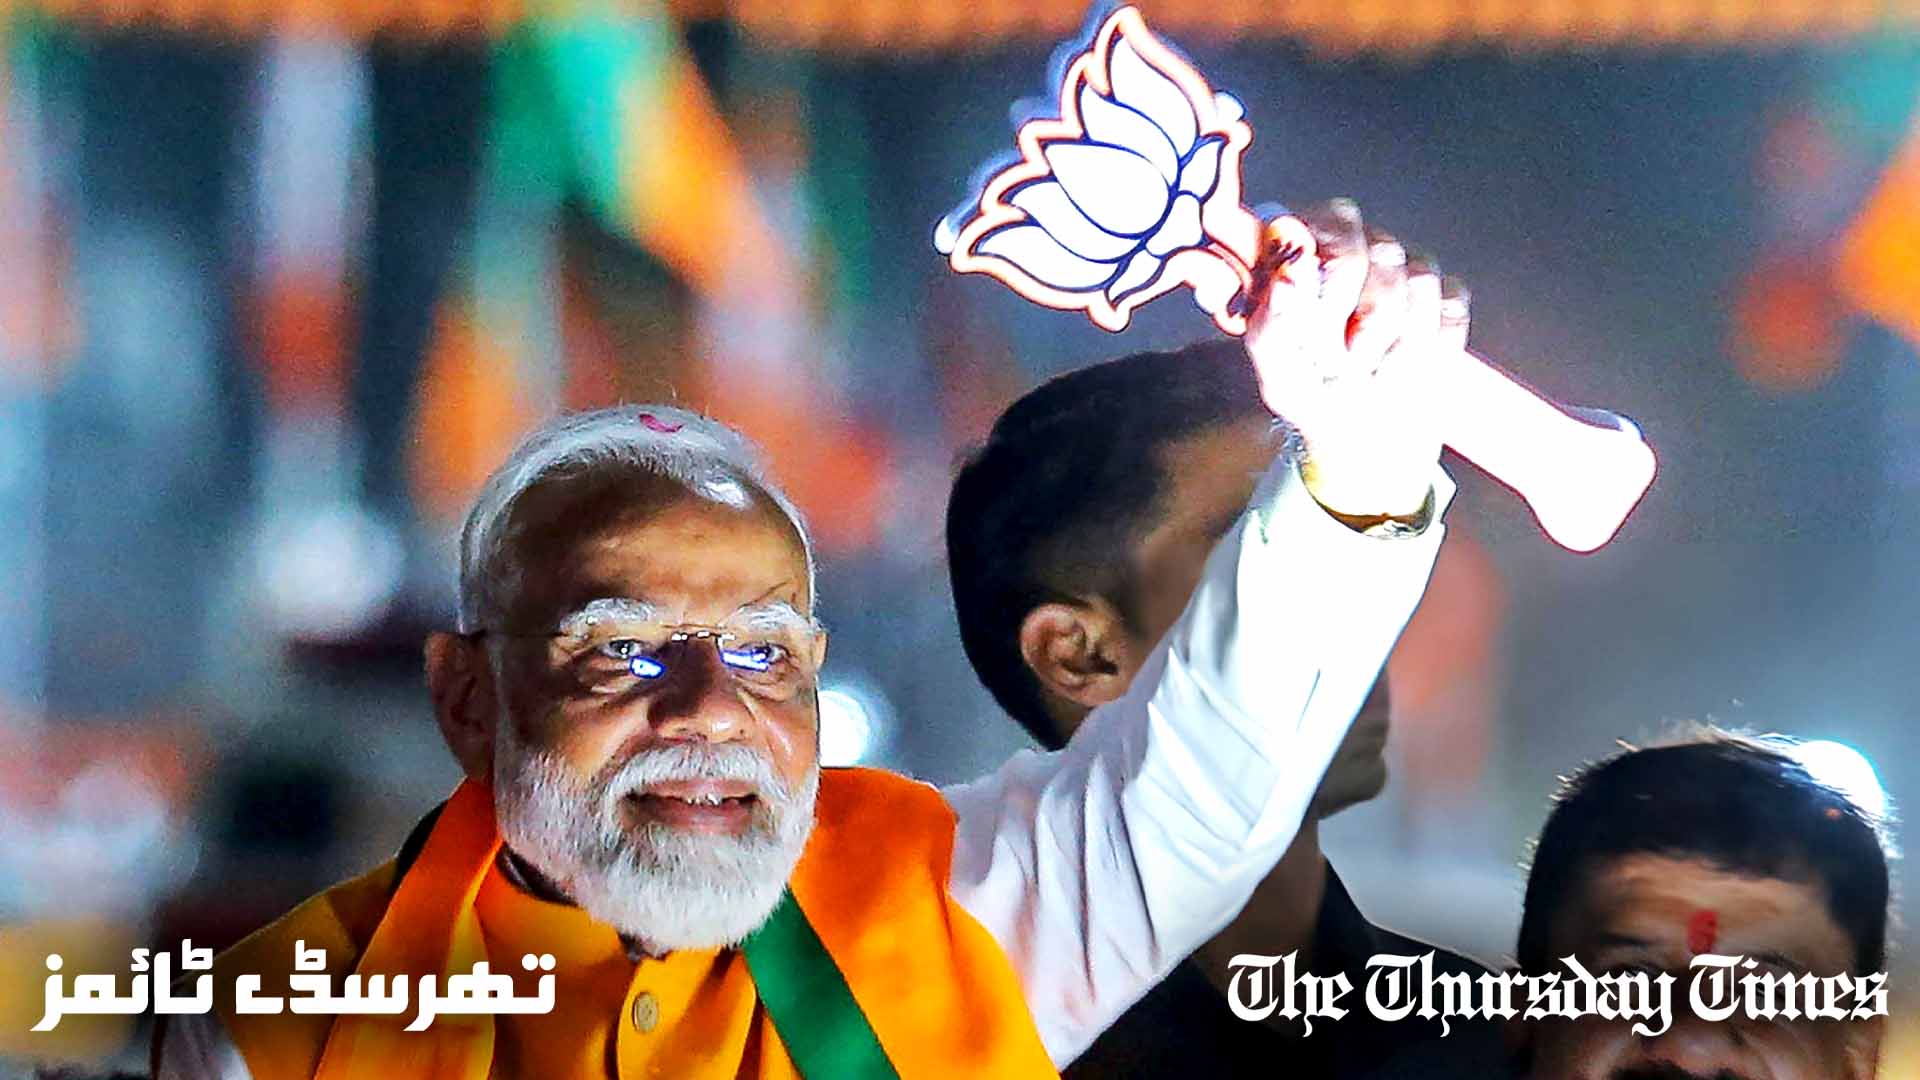 A file photo is shown of Indian prime minister Narendra Modi at a Bhopal rally on April 24, 2024. — FILE/THE THURSDAY TIMES VIA AFP